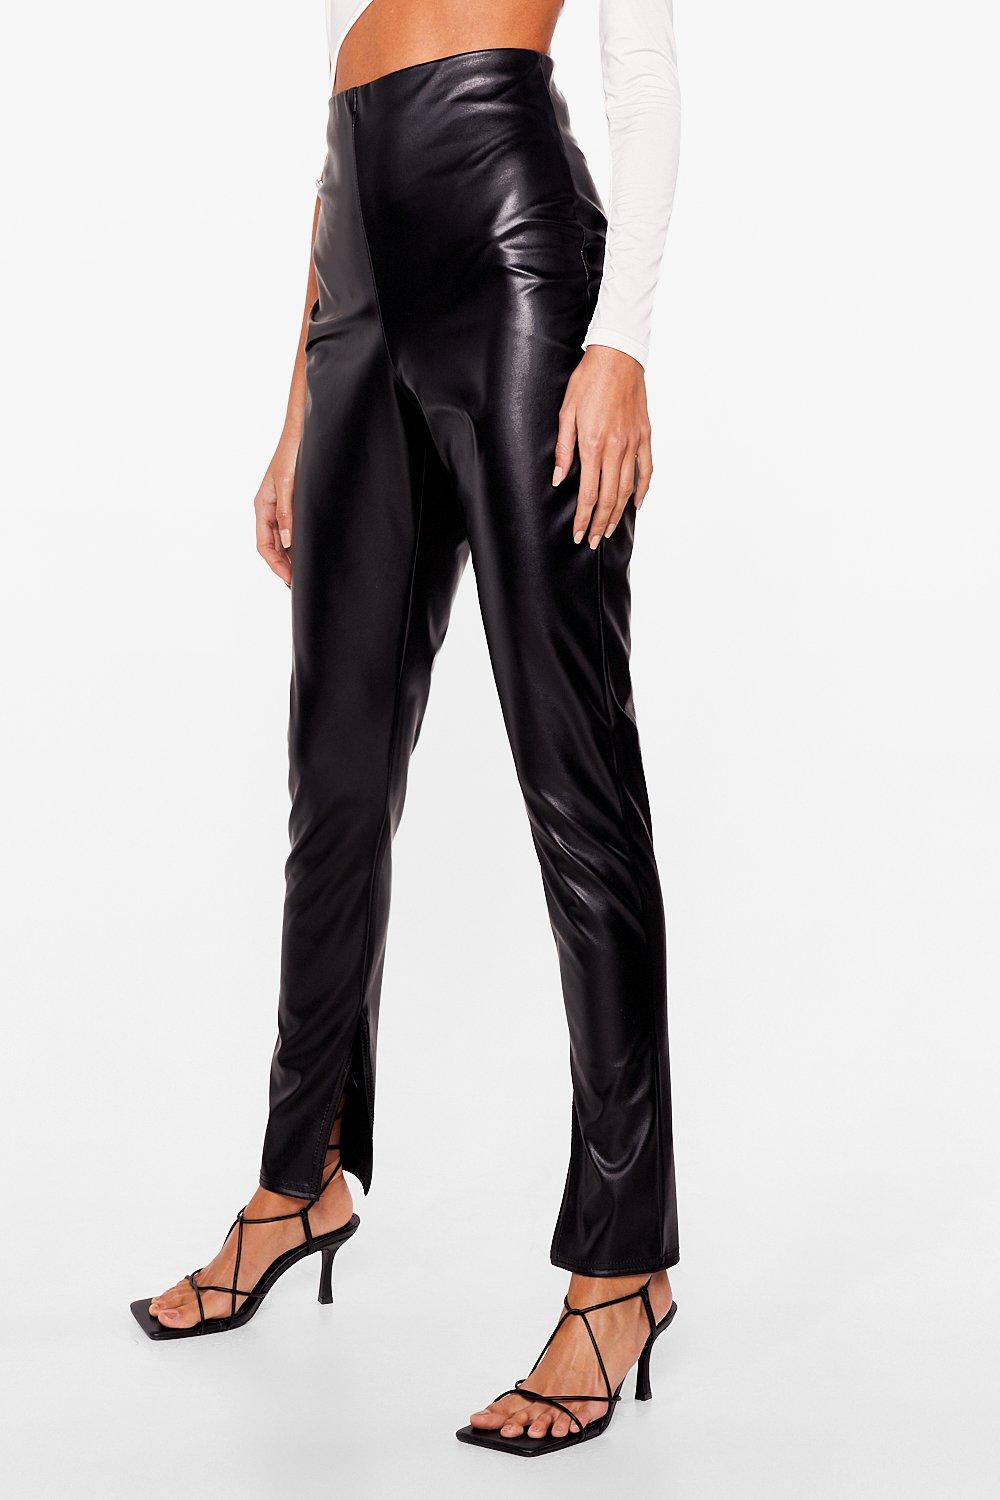 Topshop Tall leather look legging in black - ShopStyle